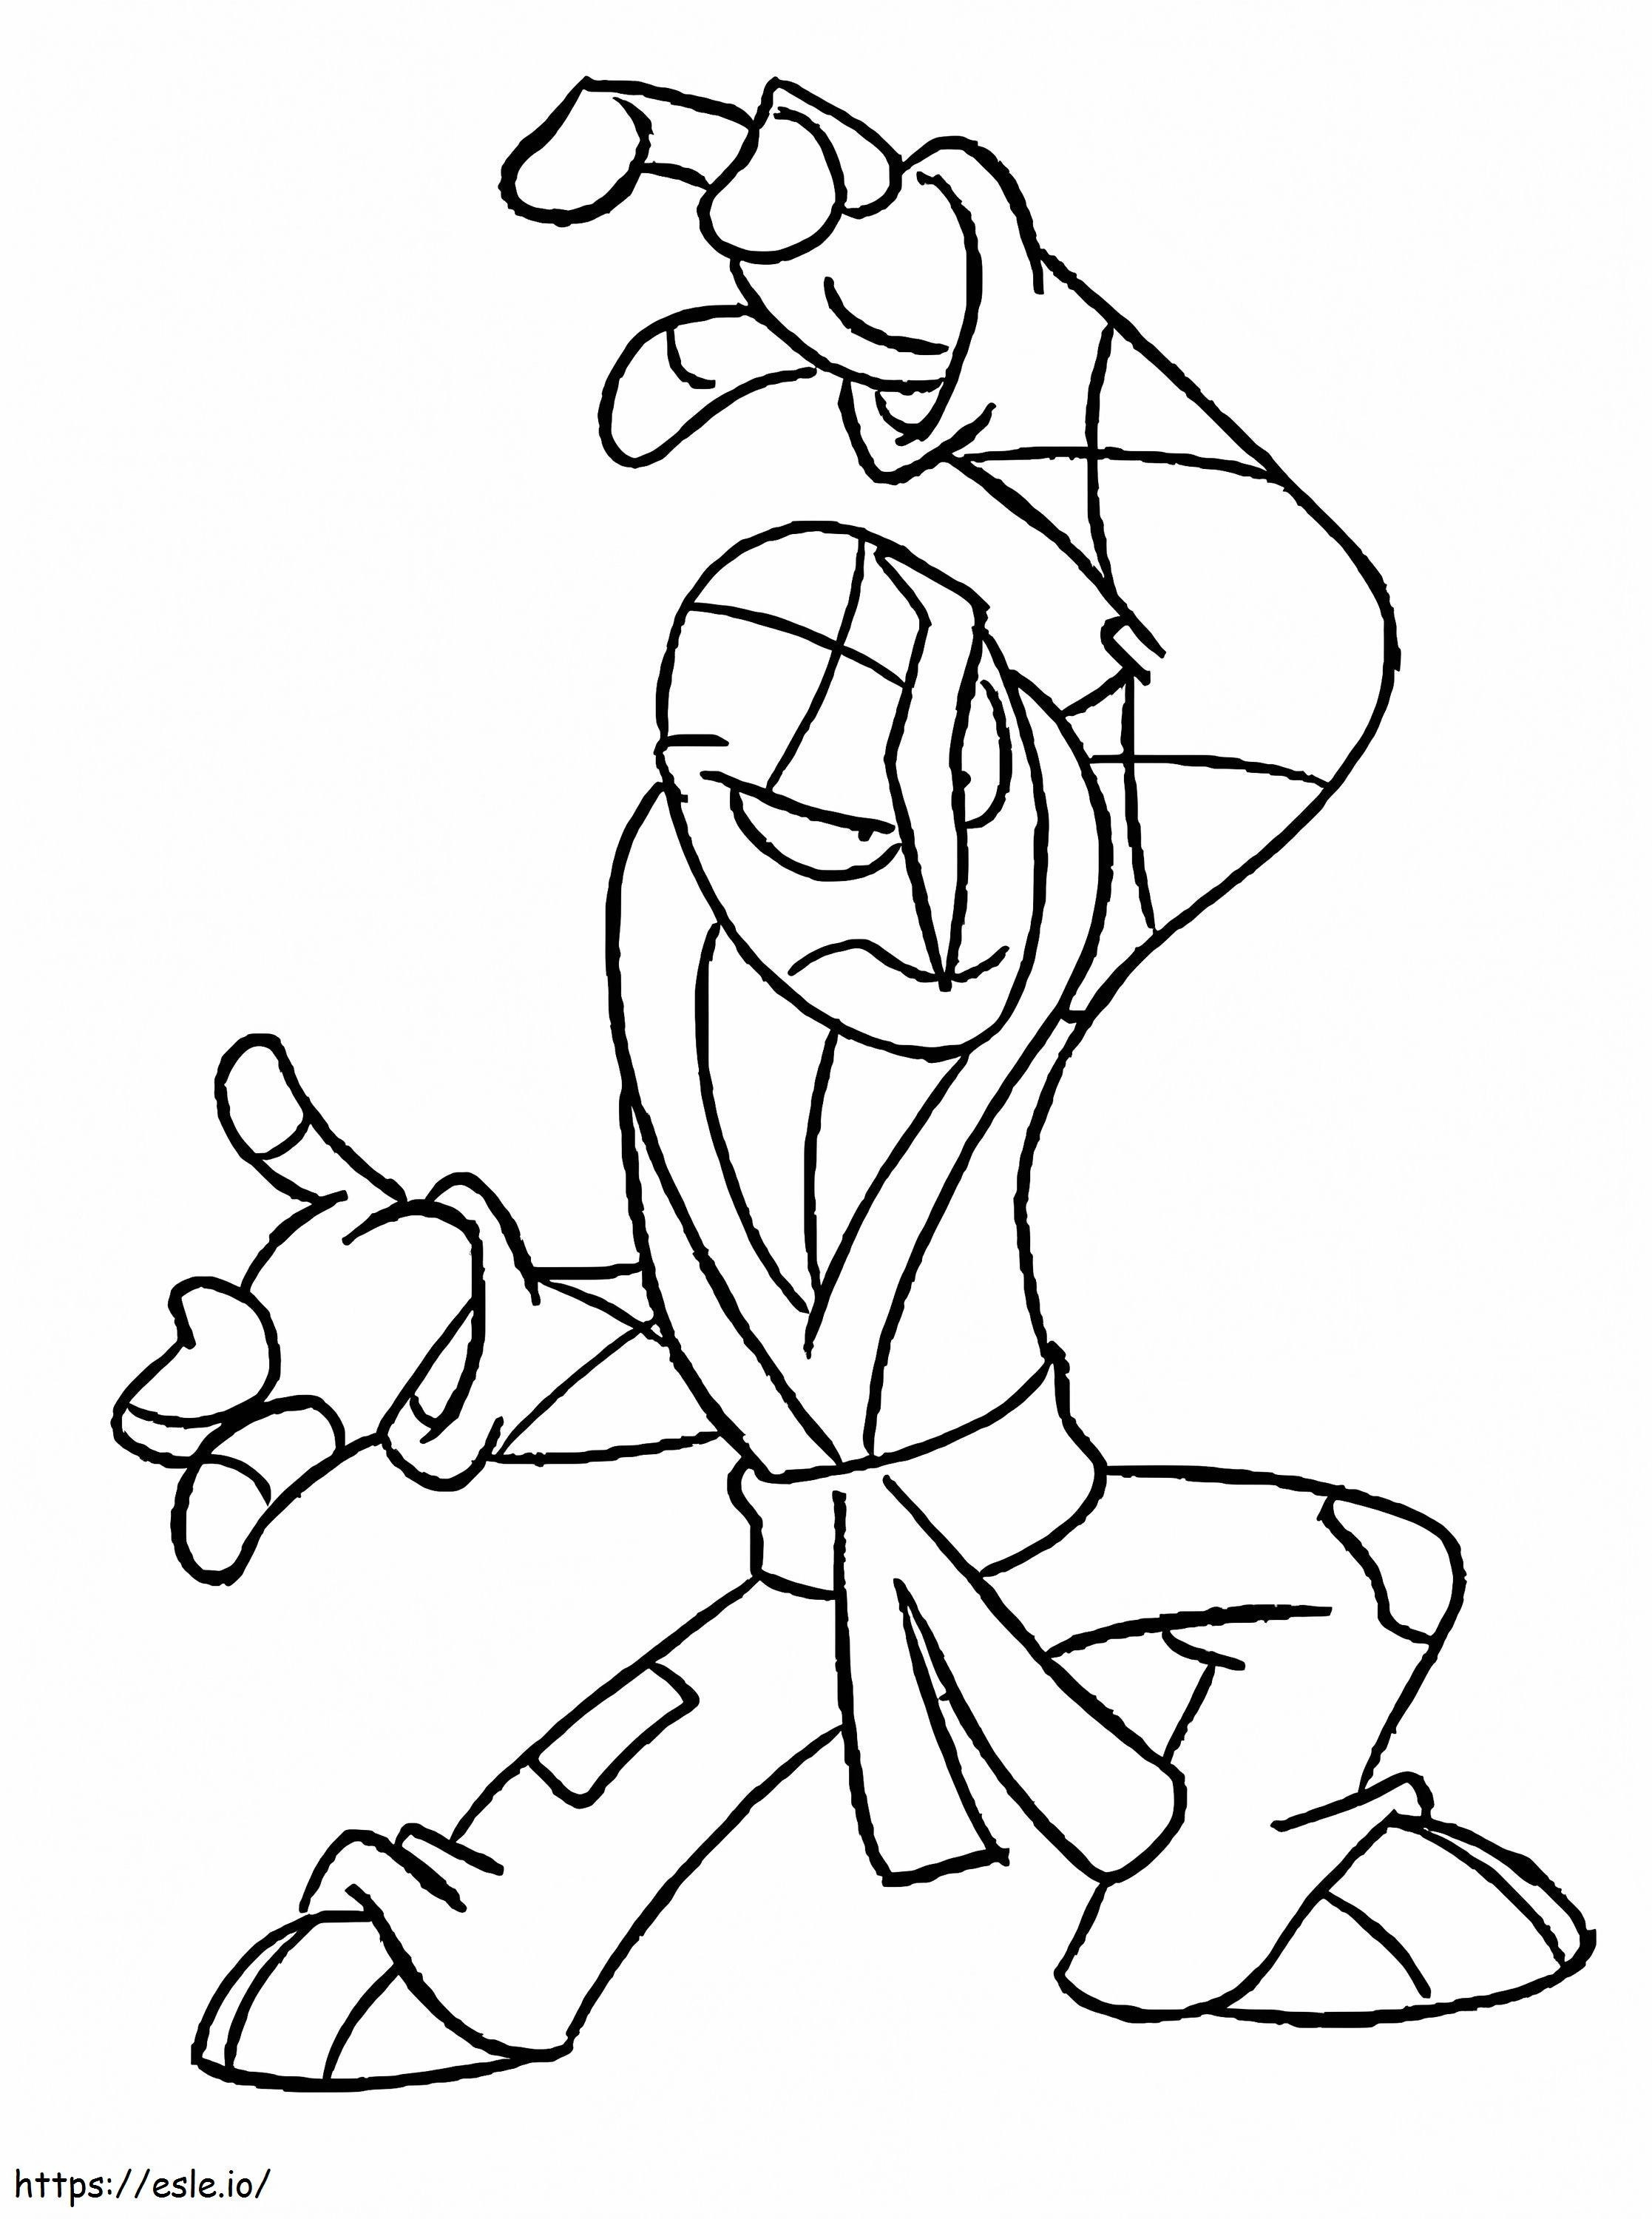 Funny Sawk coloring page